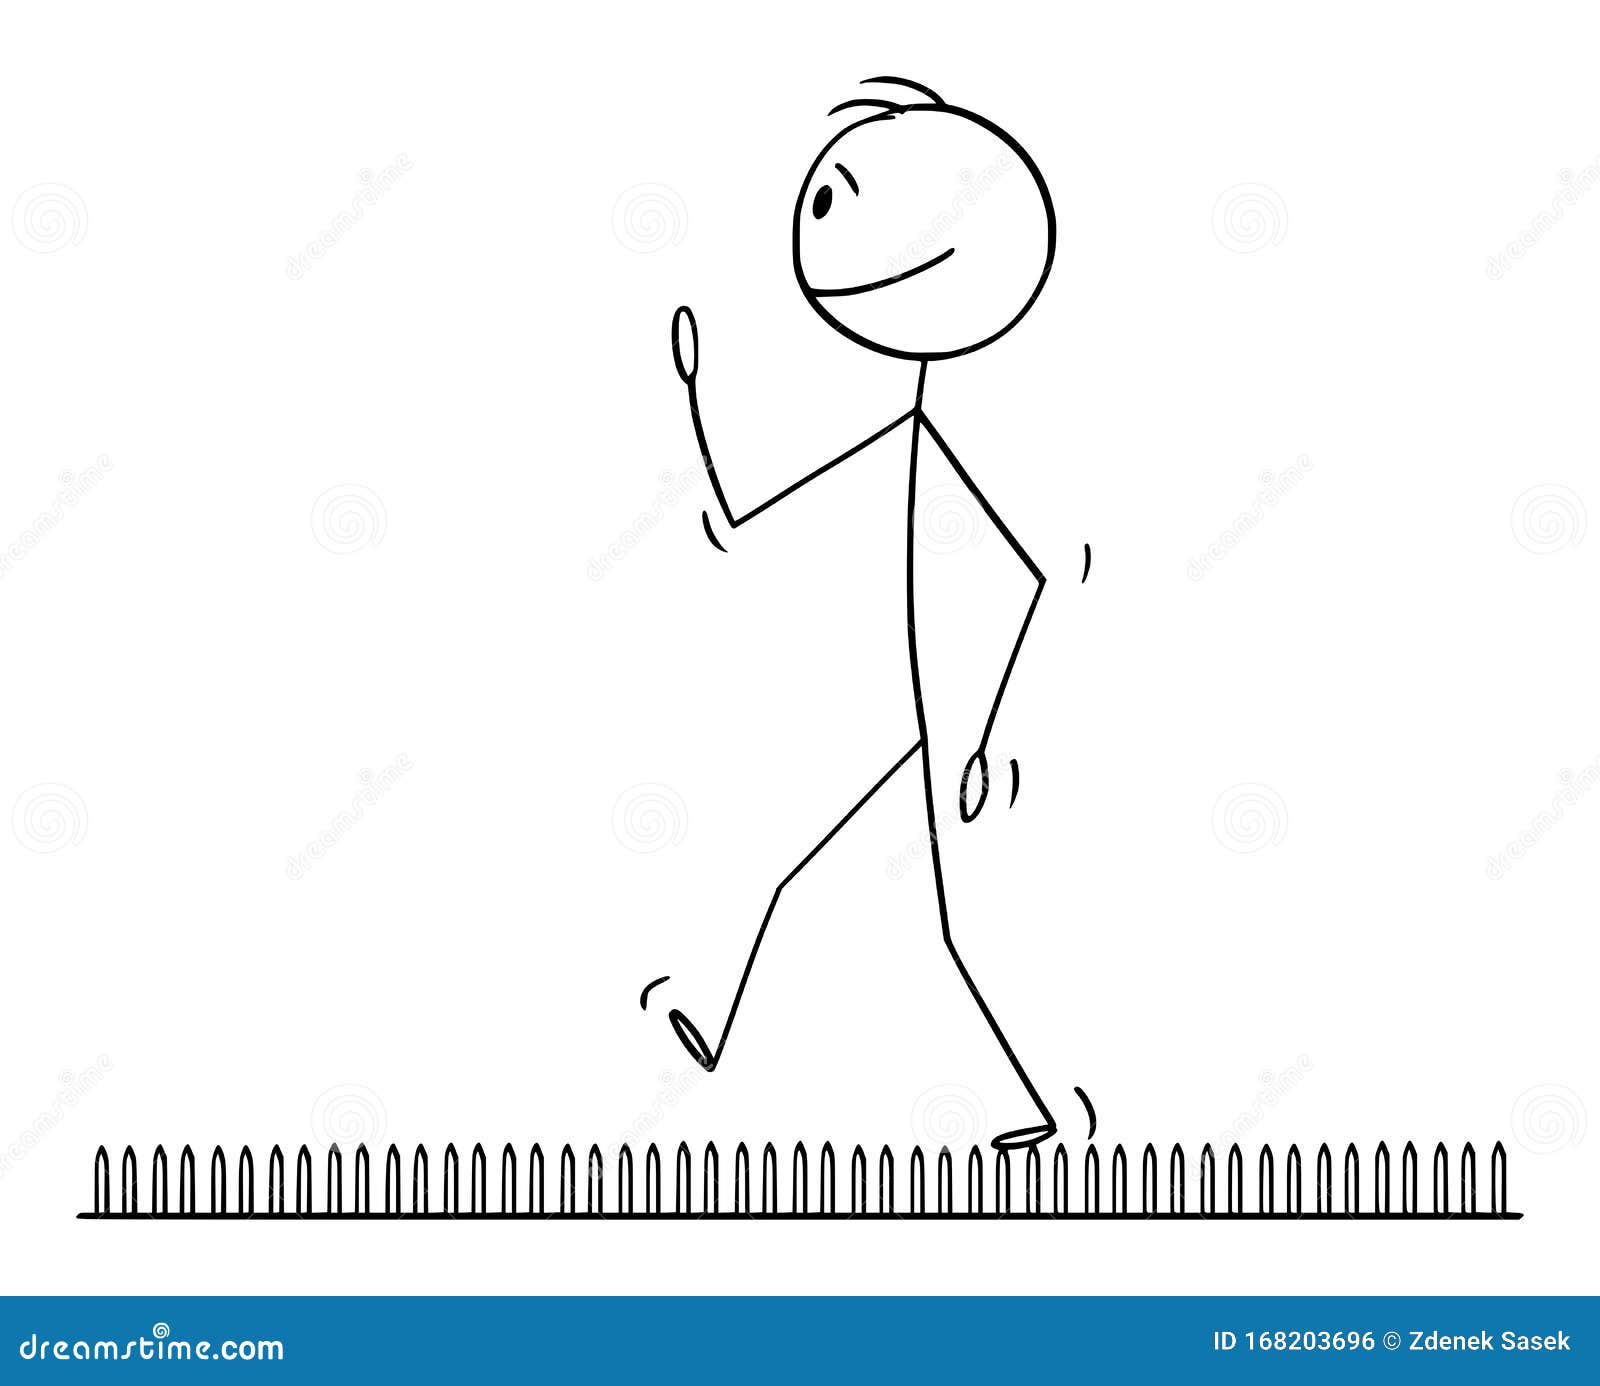  cartoon  of man or businessman walking on nails or fakir bed. concept of challenge, achievement and